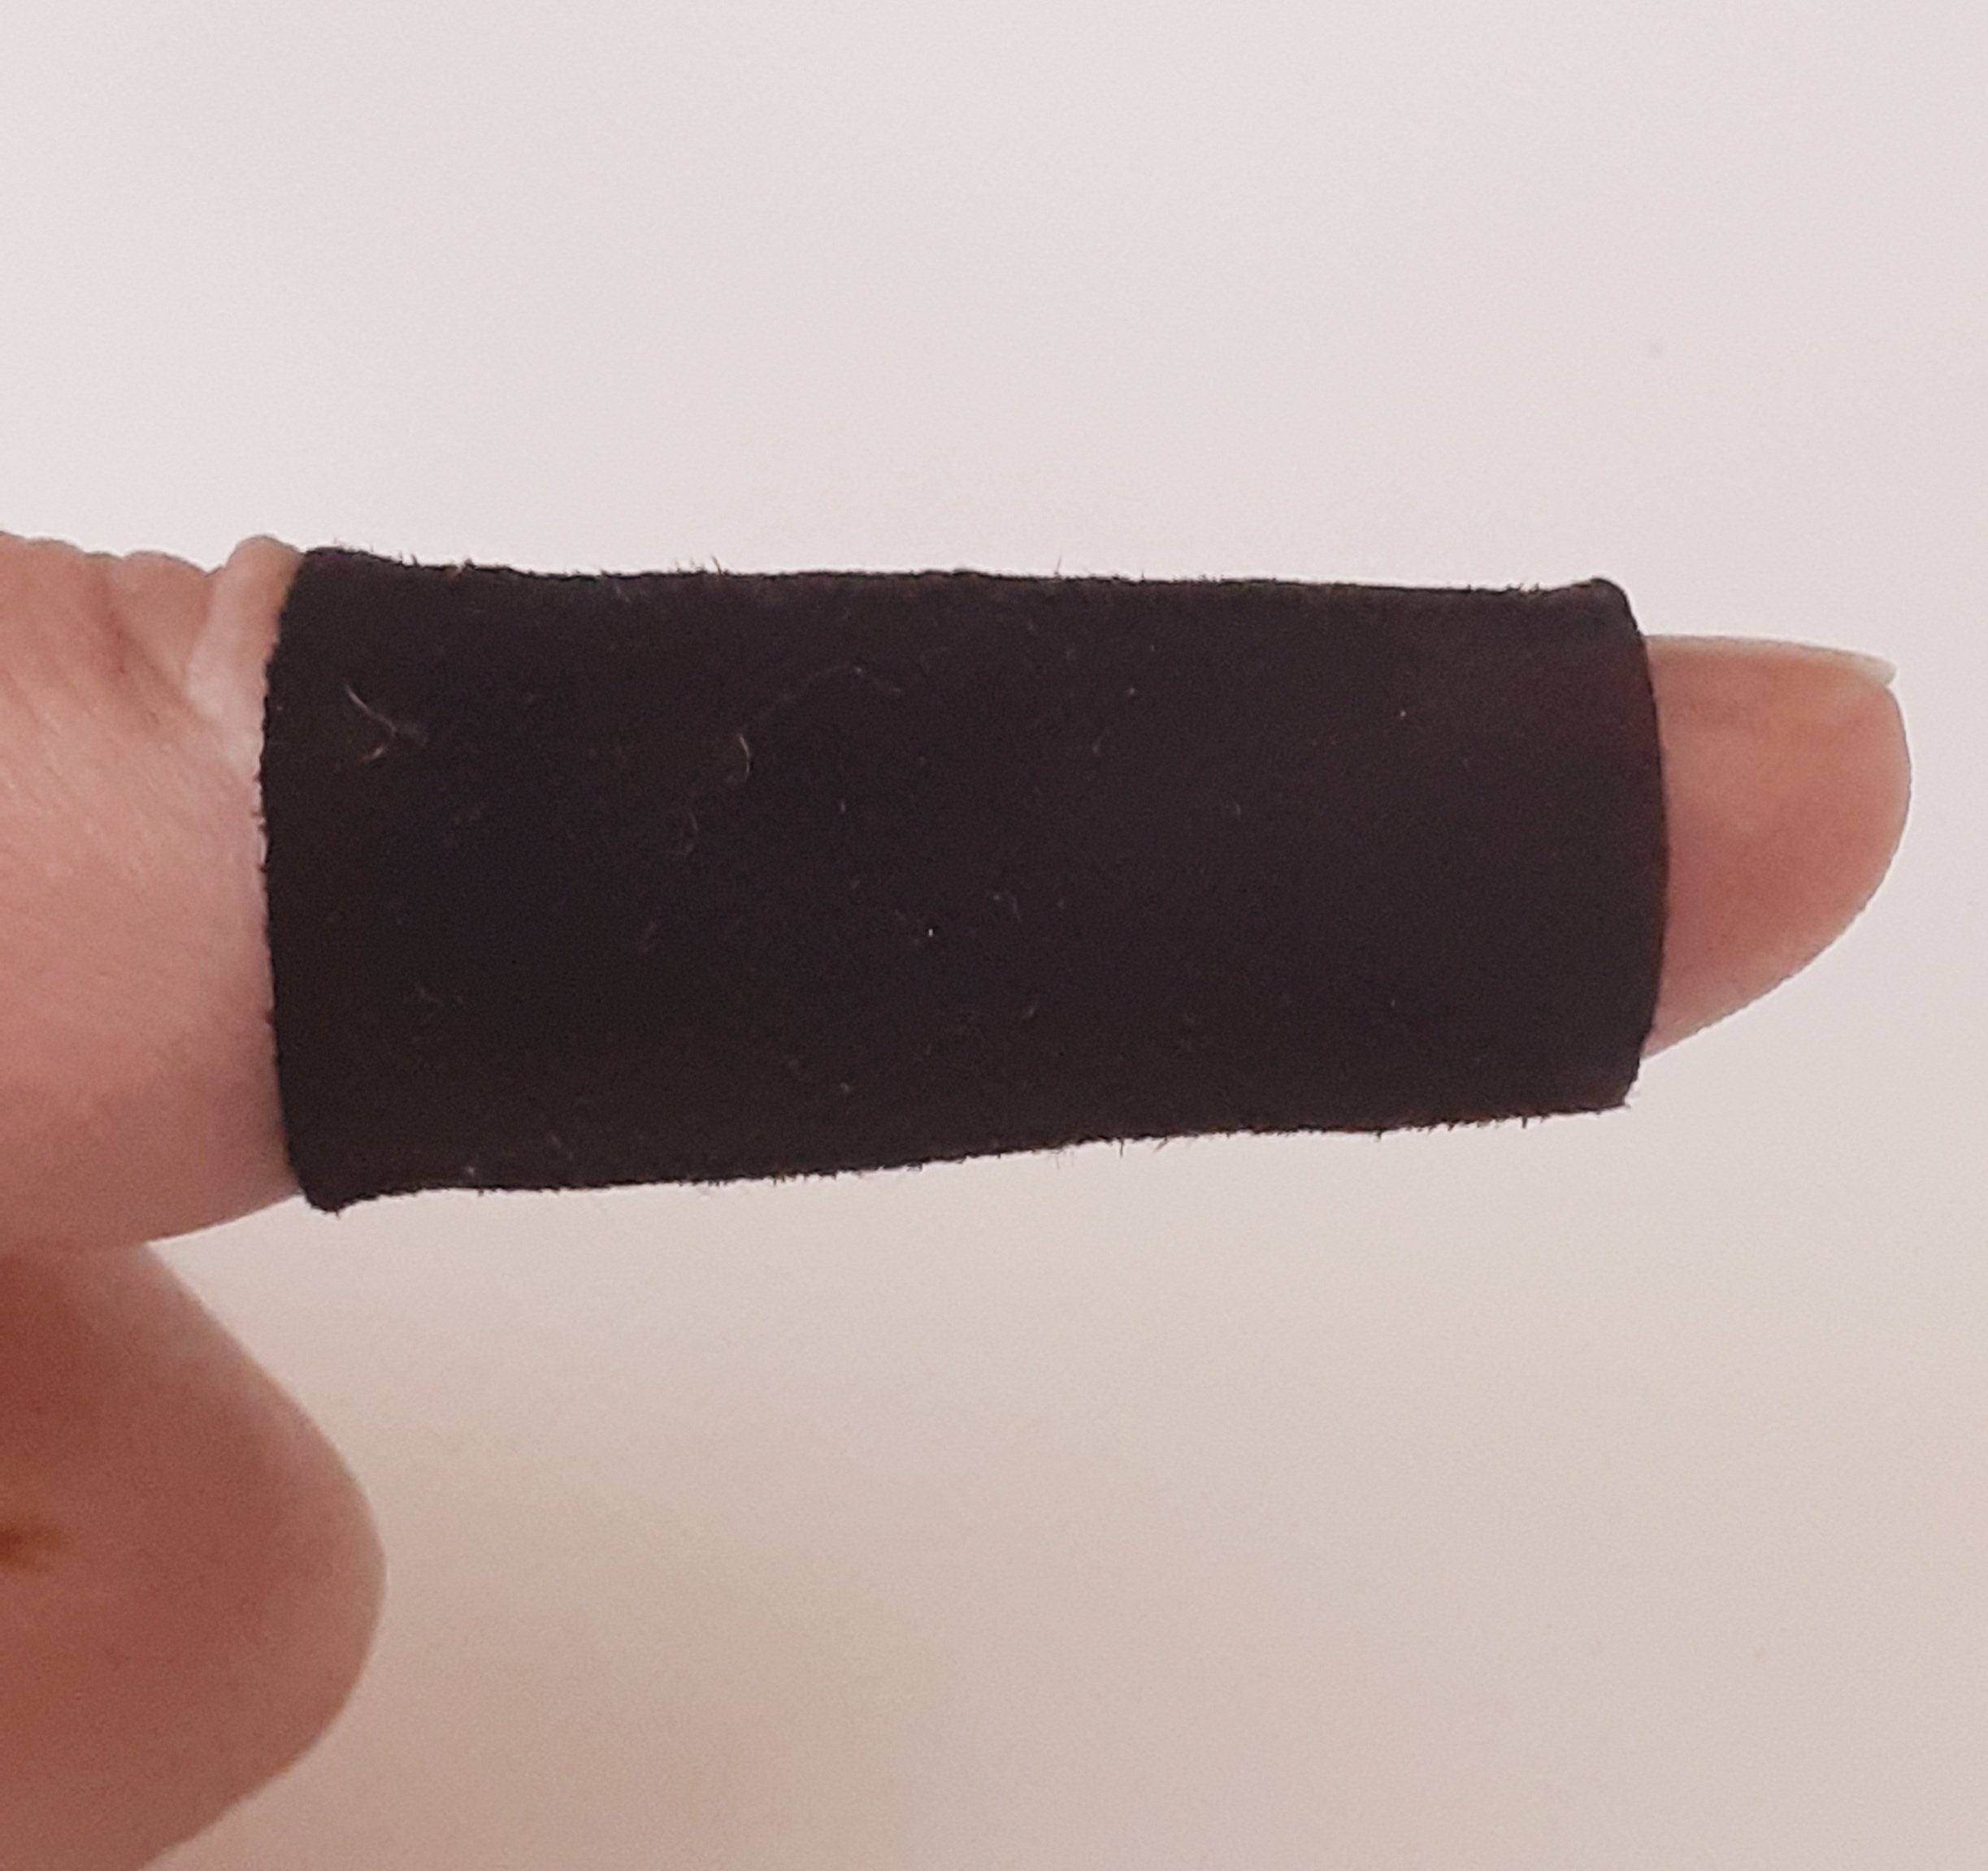  VILLCASE Knitting Finger Protector for Sewing Leather